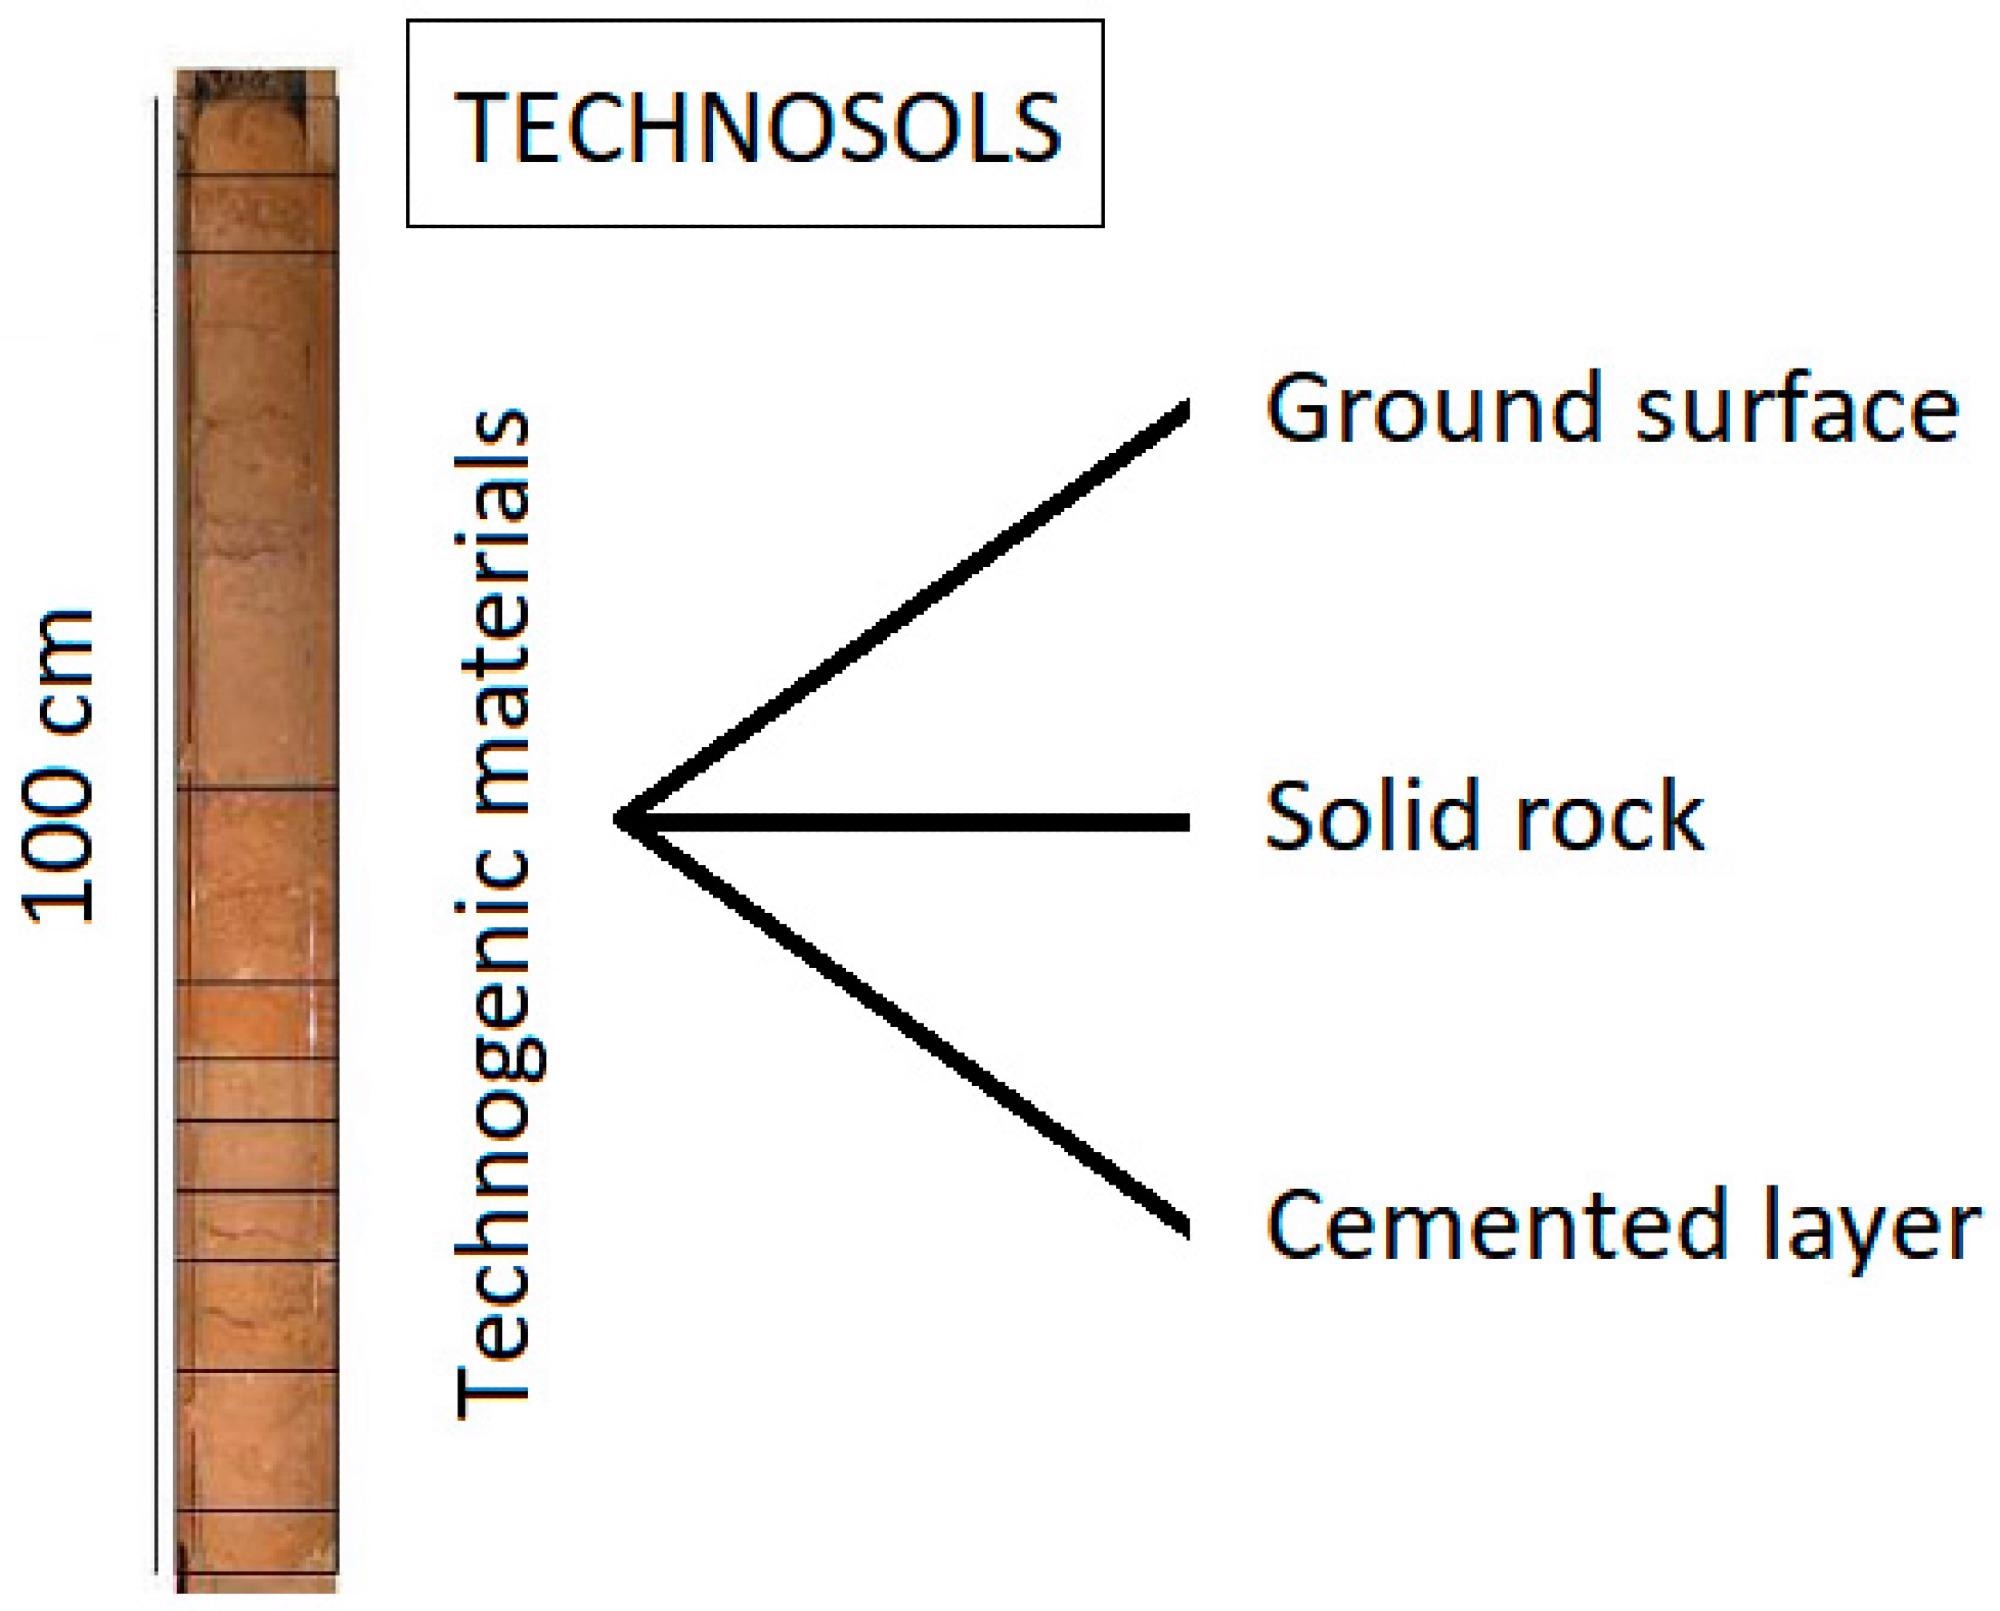 Outline definition of the term “Technosols”.